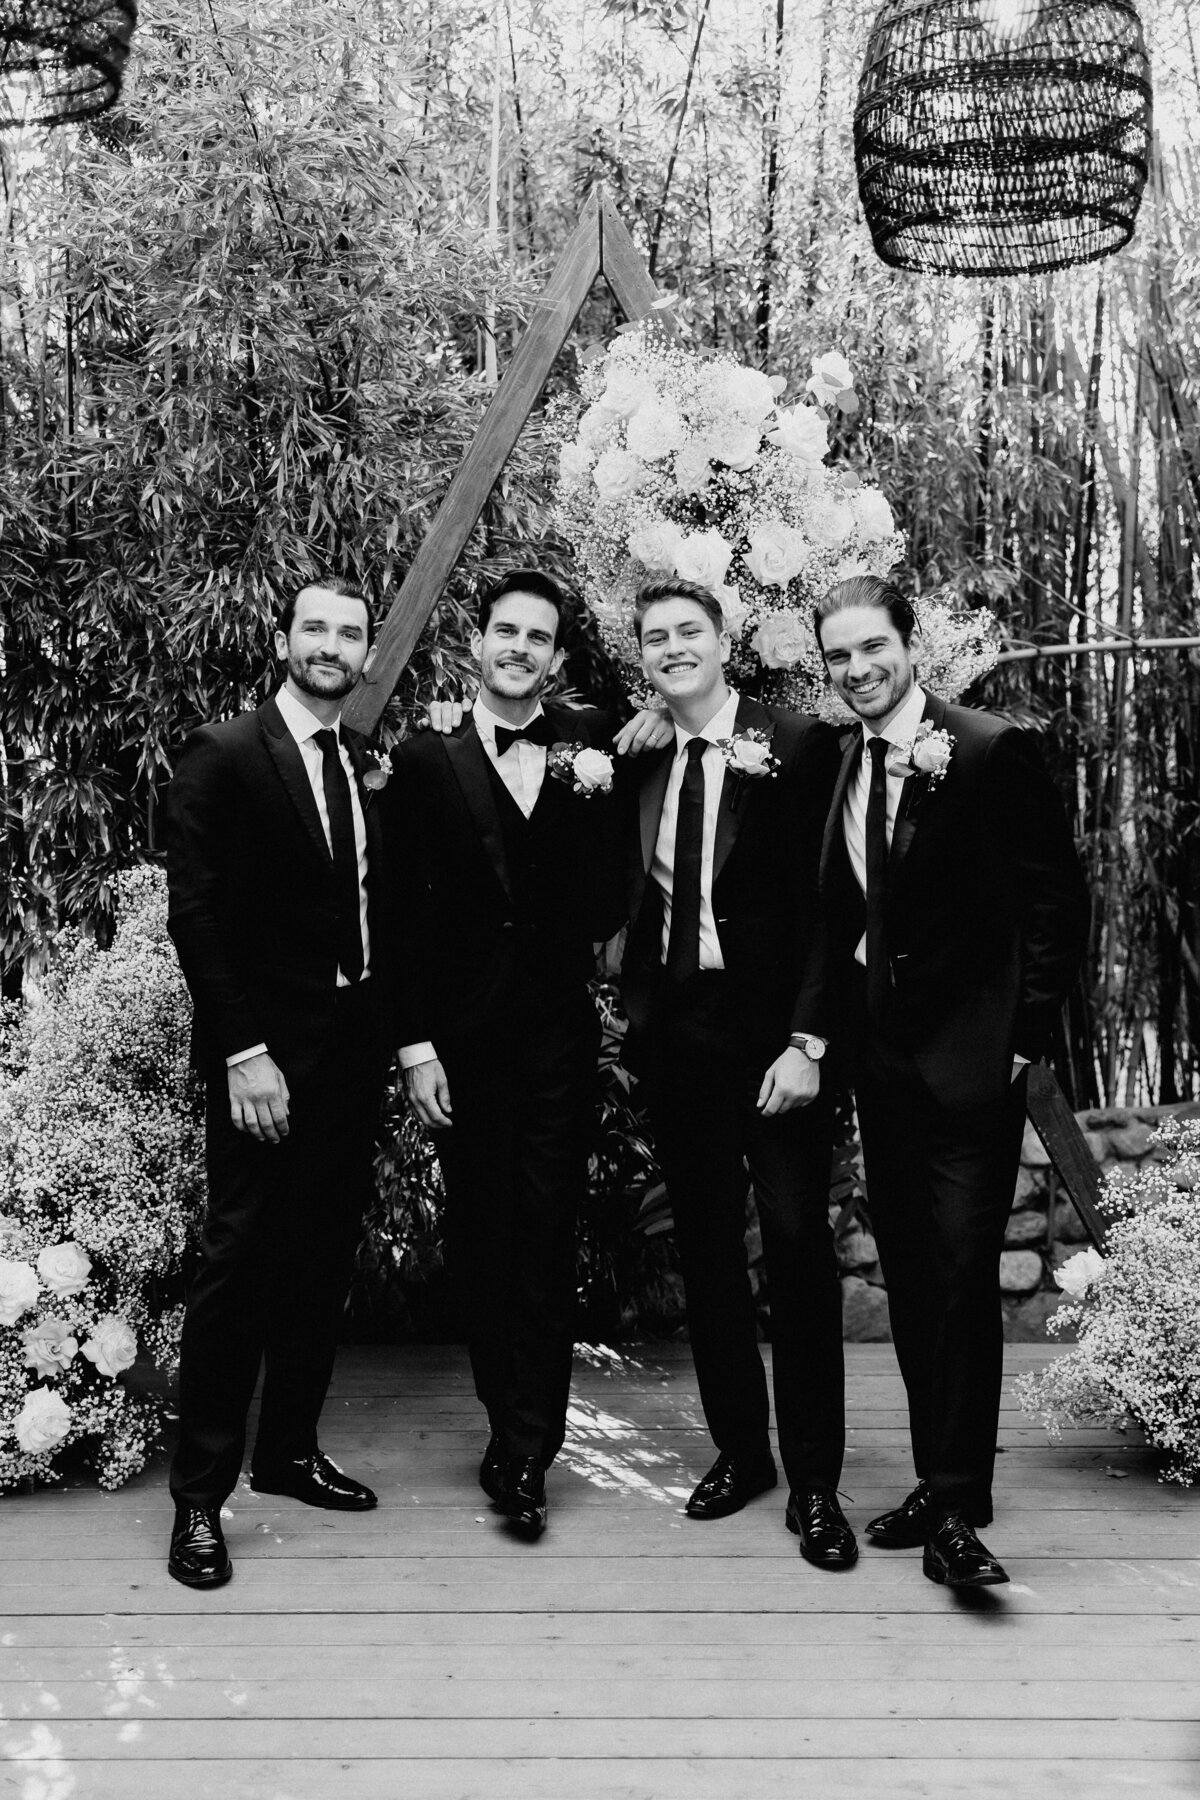 Elopement Photography, groom with groomsman pose for photo in black and white in front of ceremony arch